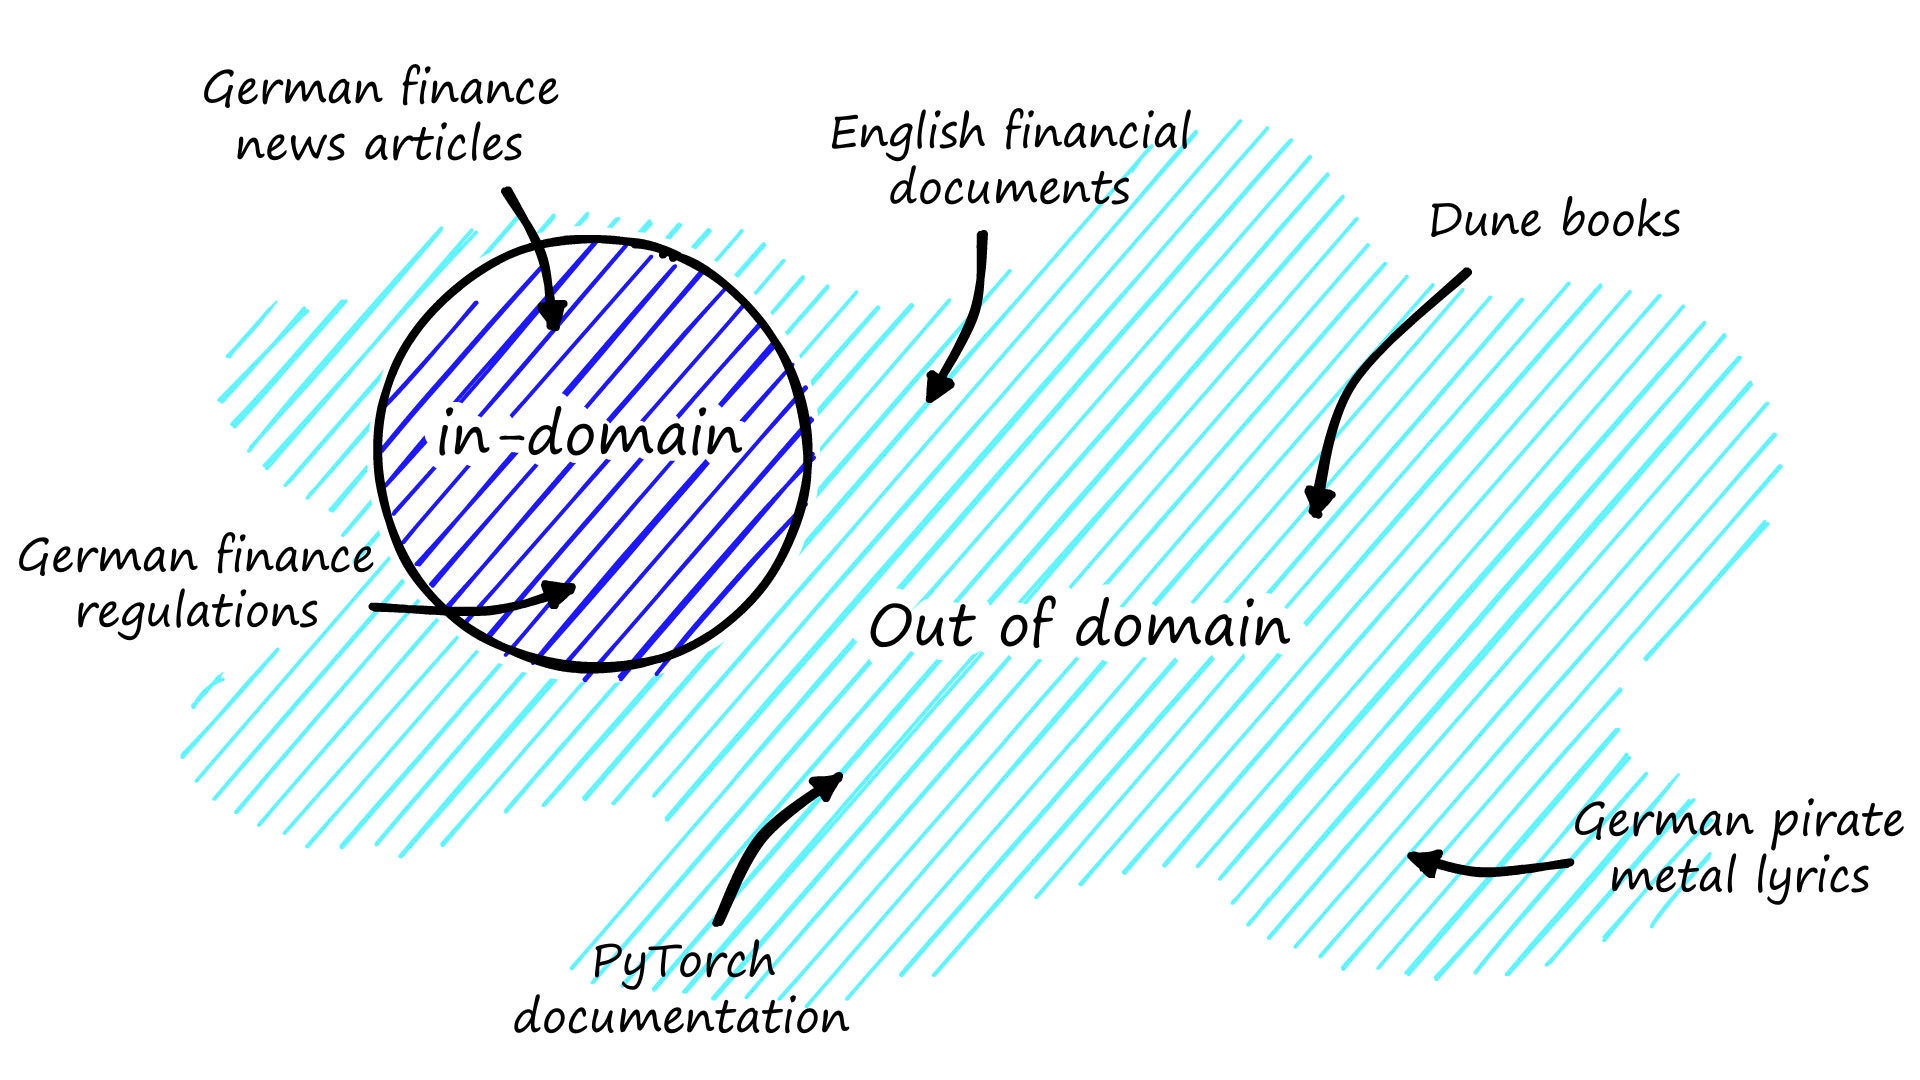 For our target domain of German financial documents, anything that fits the topic and we would expect our model to encounter is in-domain. Anything else is out-of-domain.